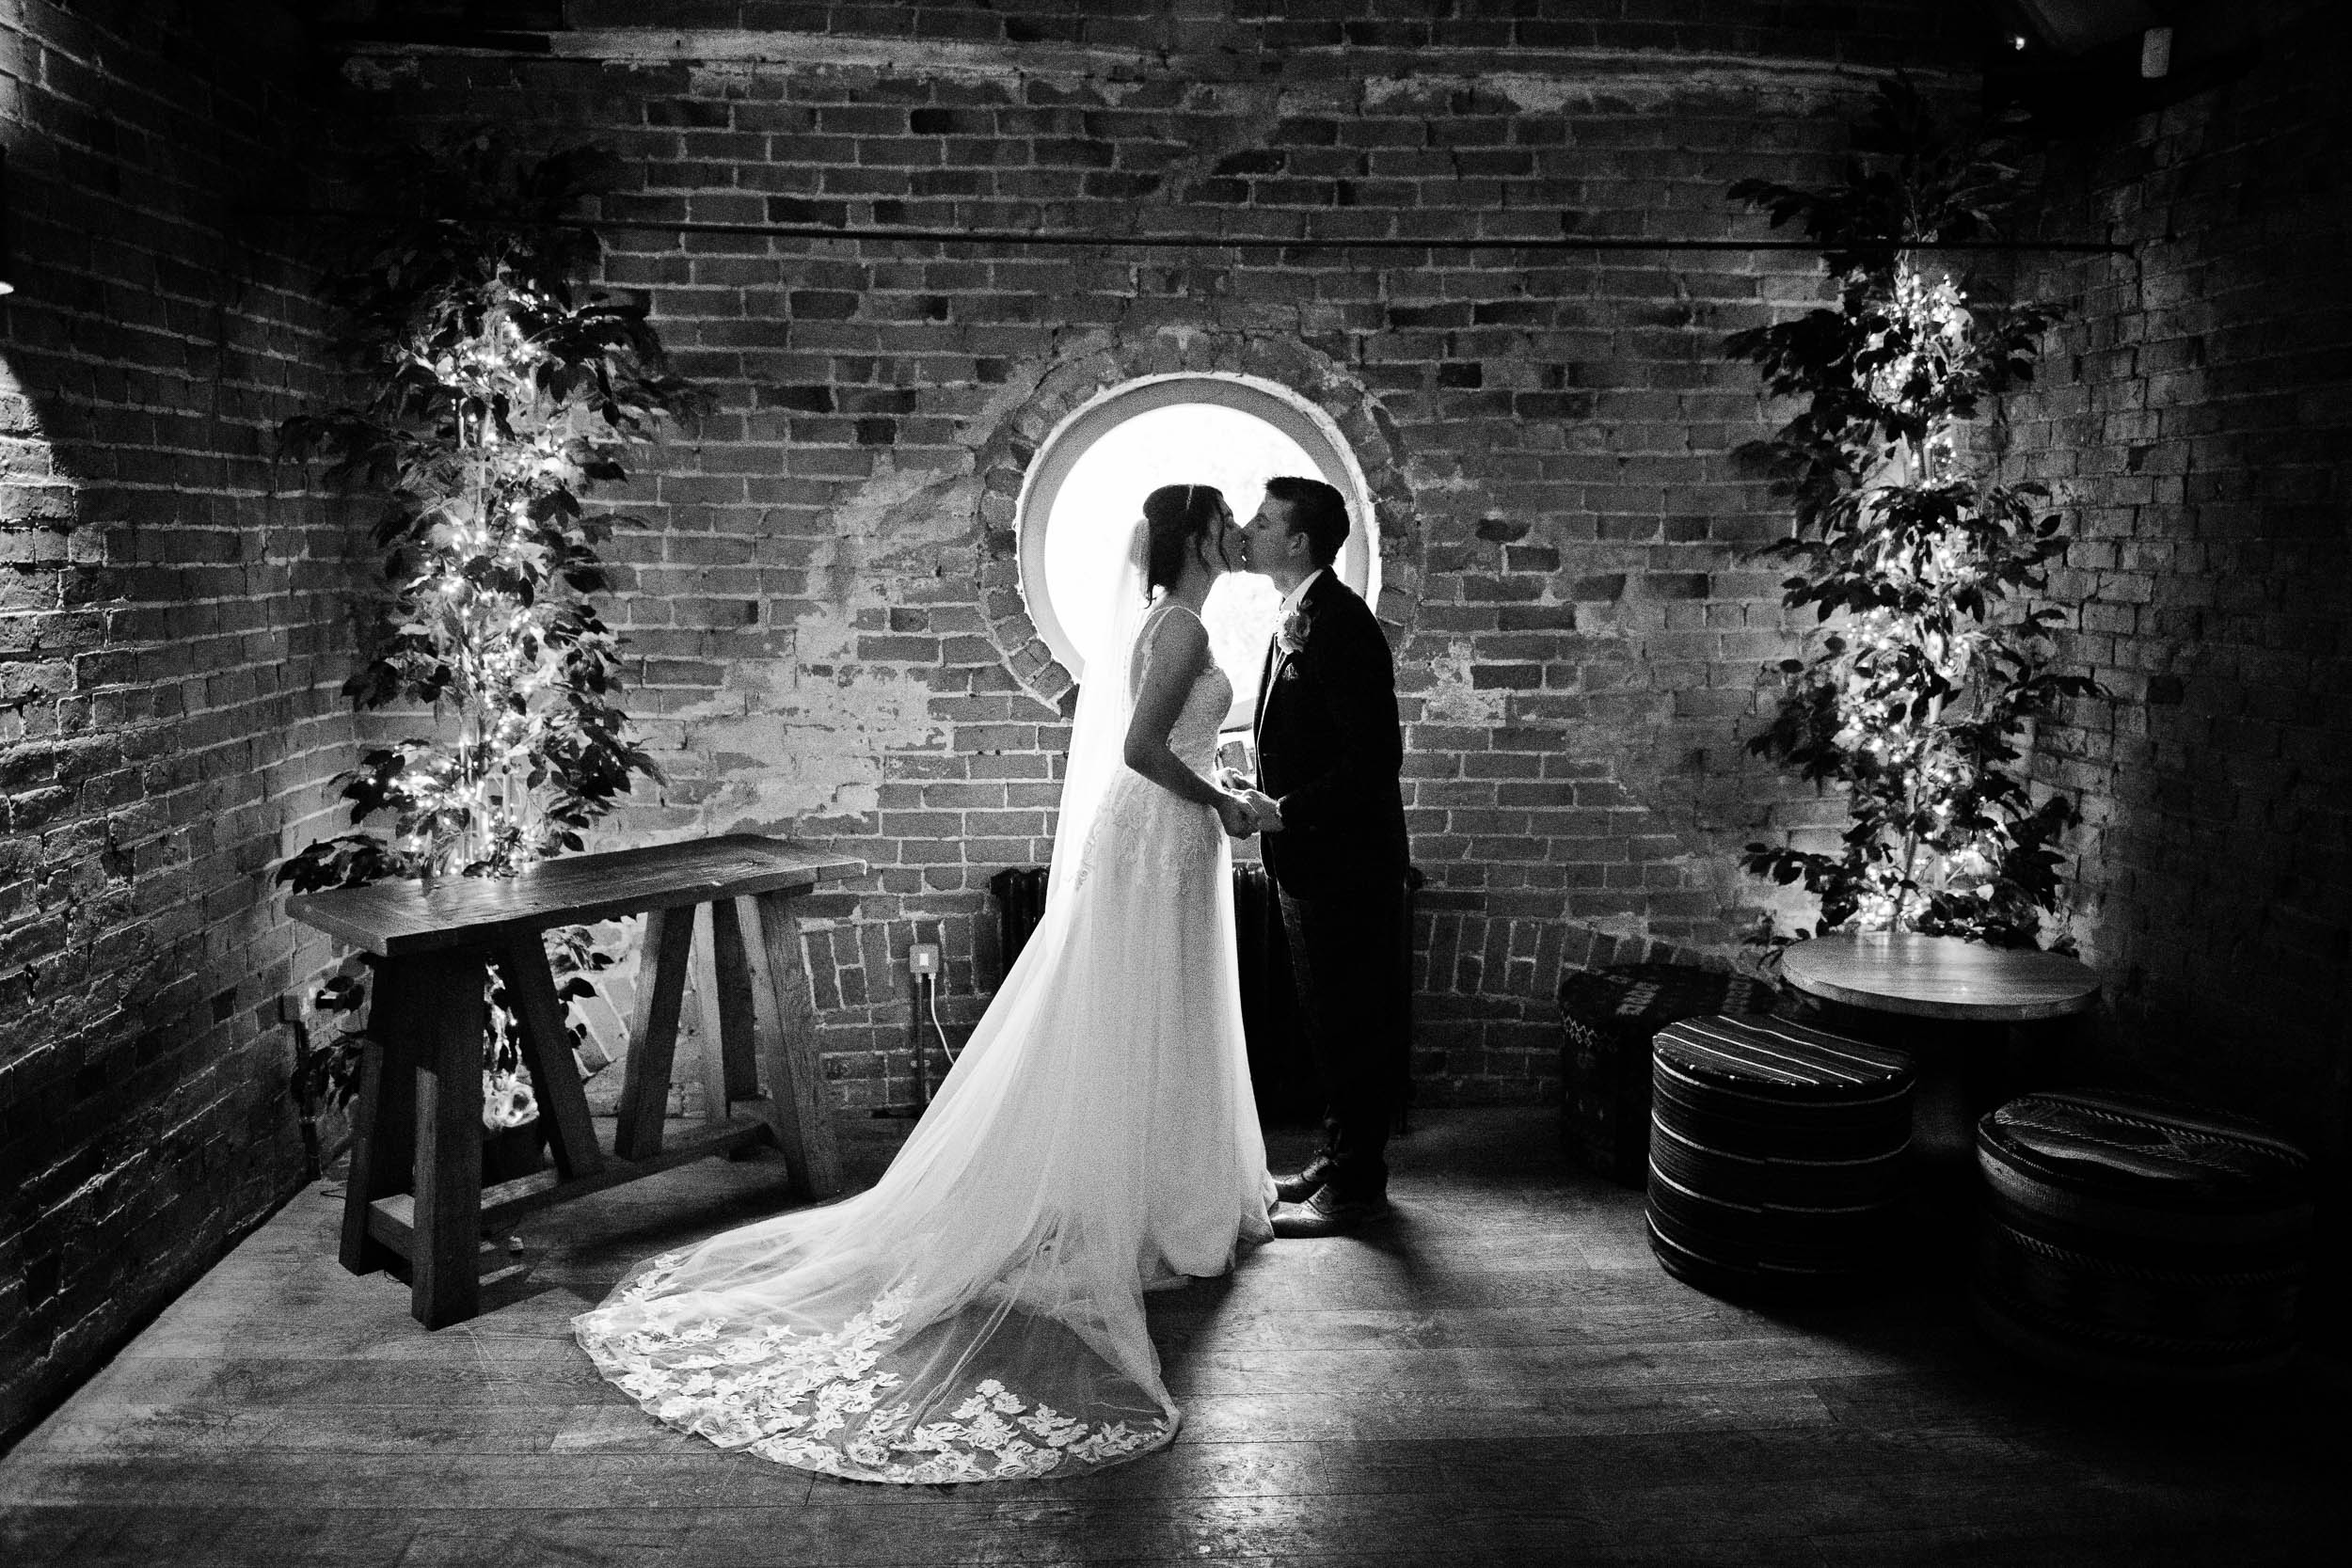 B&W image of bride and groom kissing in front of a window.  